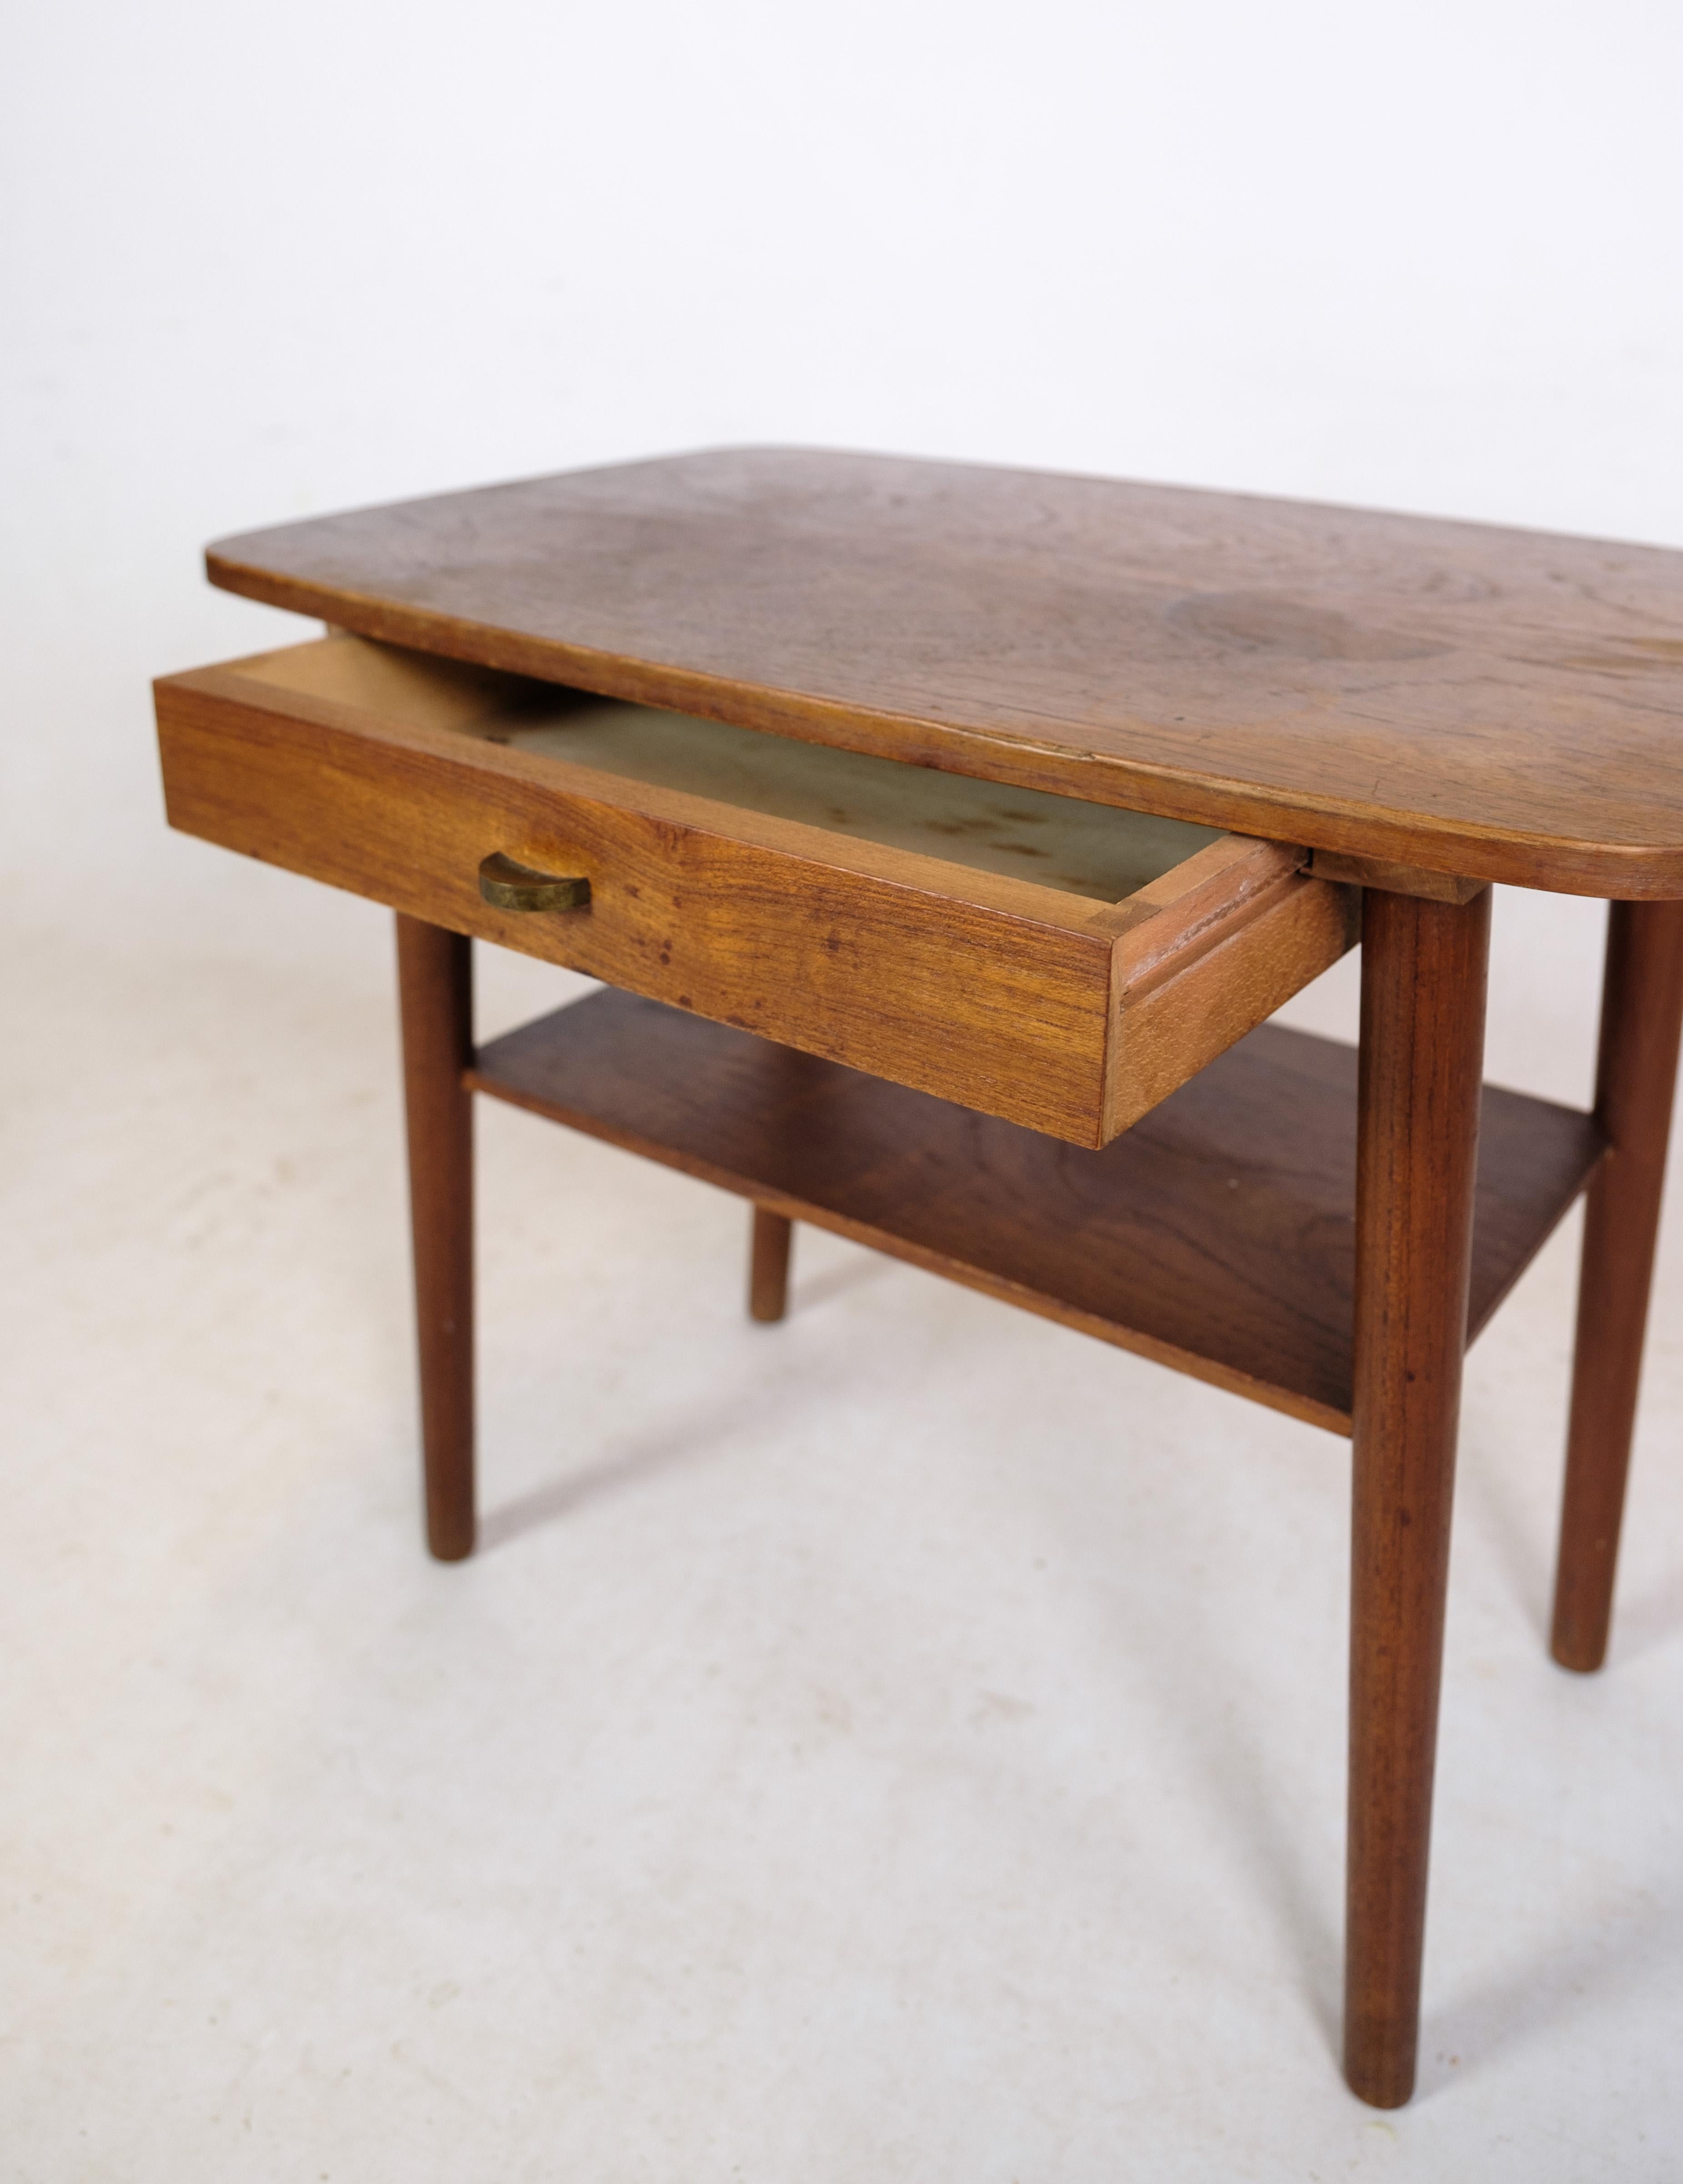 Scandinavian Modern Side Table with Drawer and Shelf in Teak Wood of Danish Design from 1960's For Sale